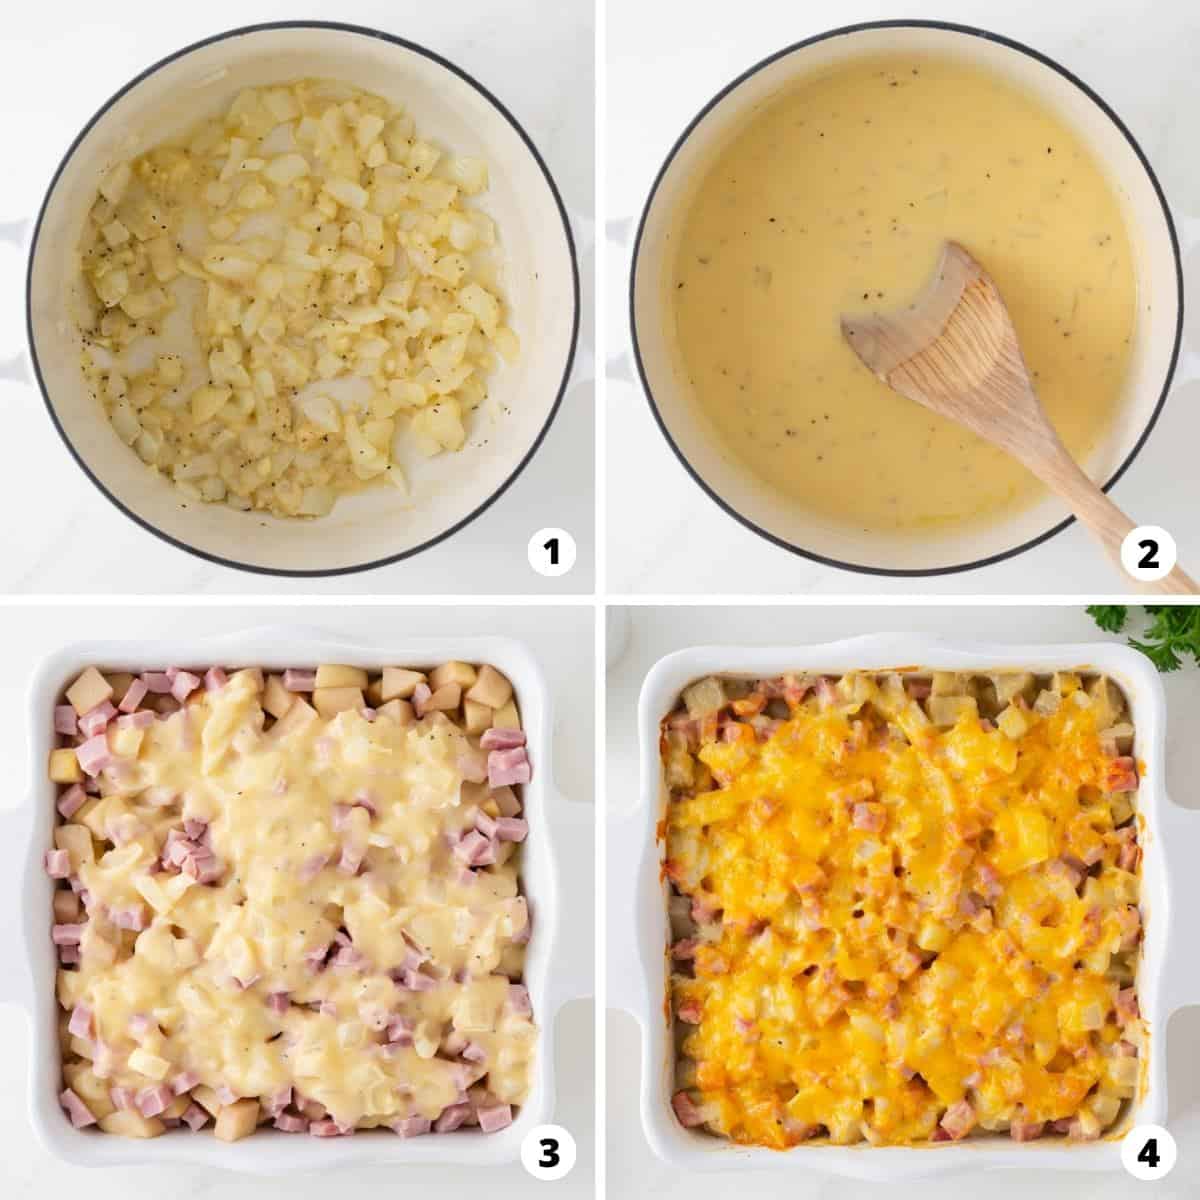 Showing how to make ham and potato casserole in a 4 step collage.